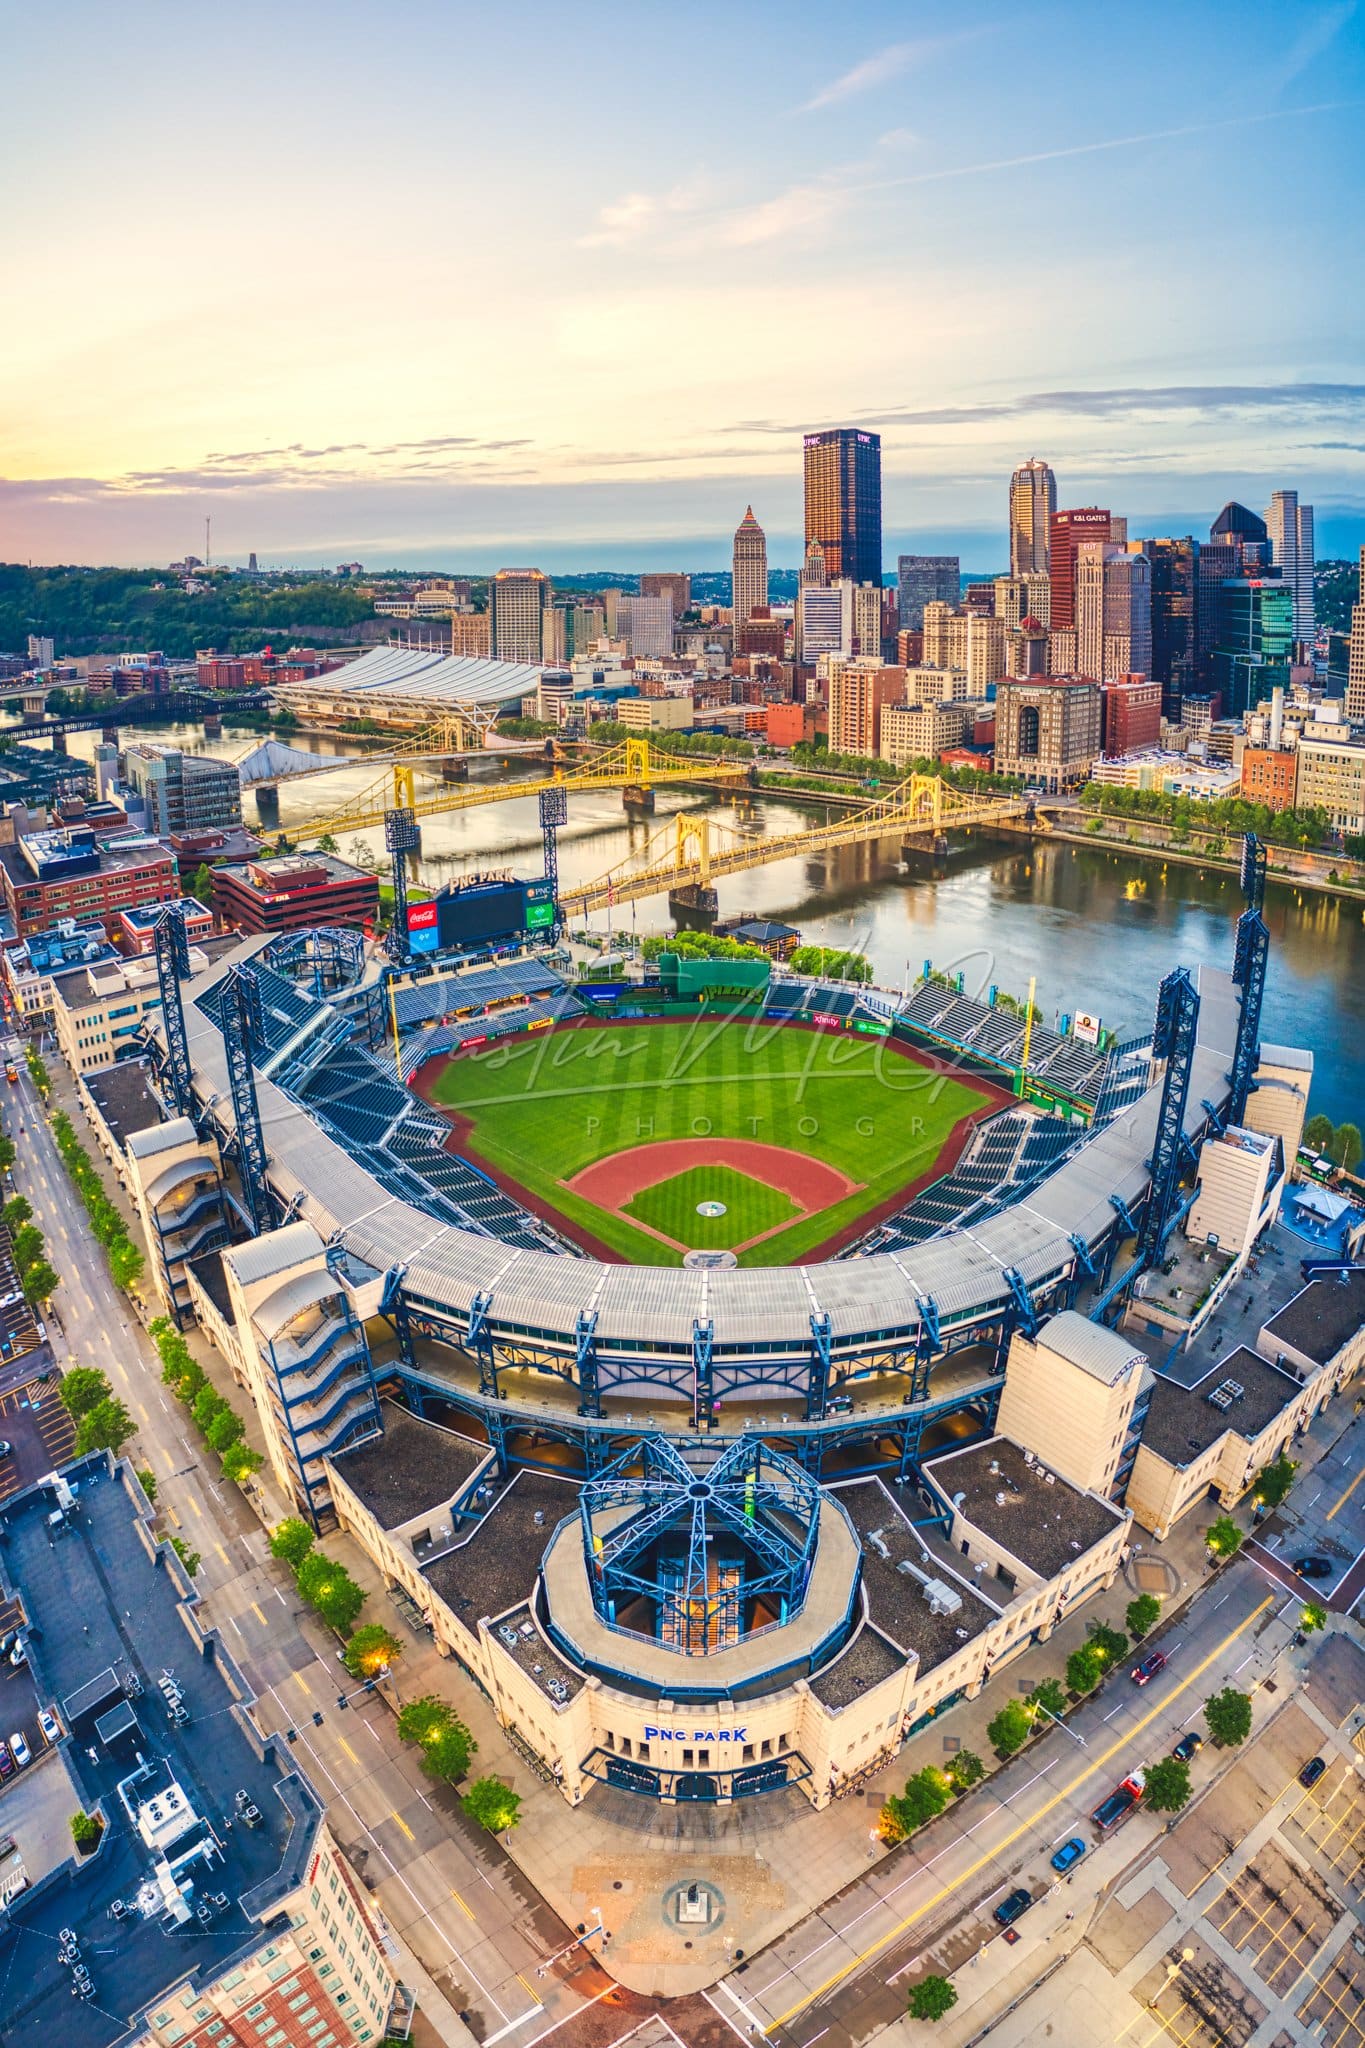  PNC Park, Home of The Pirates 36 x 24 Gallery Wrapped Canvas  Wall Art: Prints: Posters & Prints